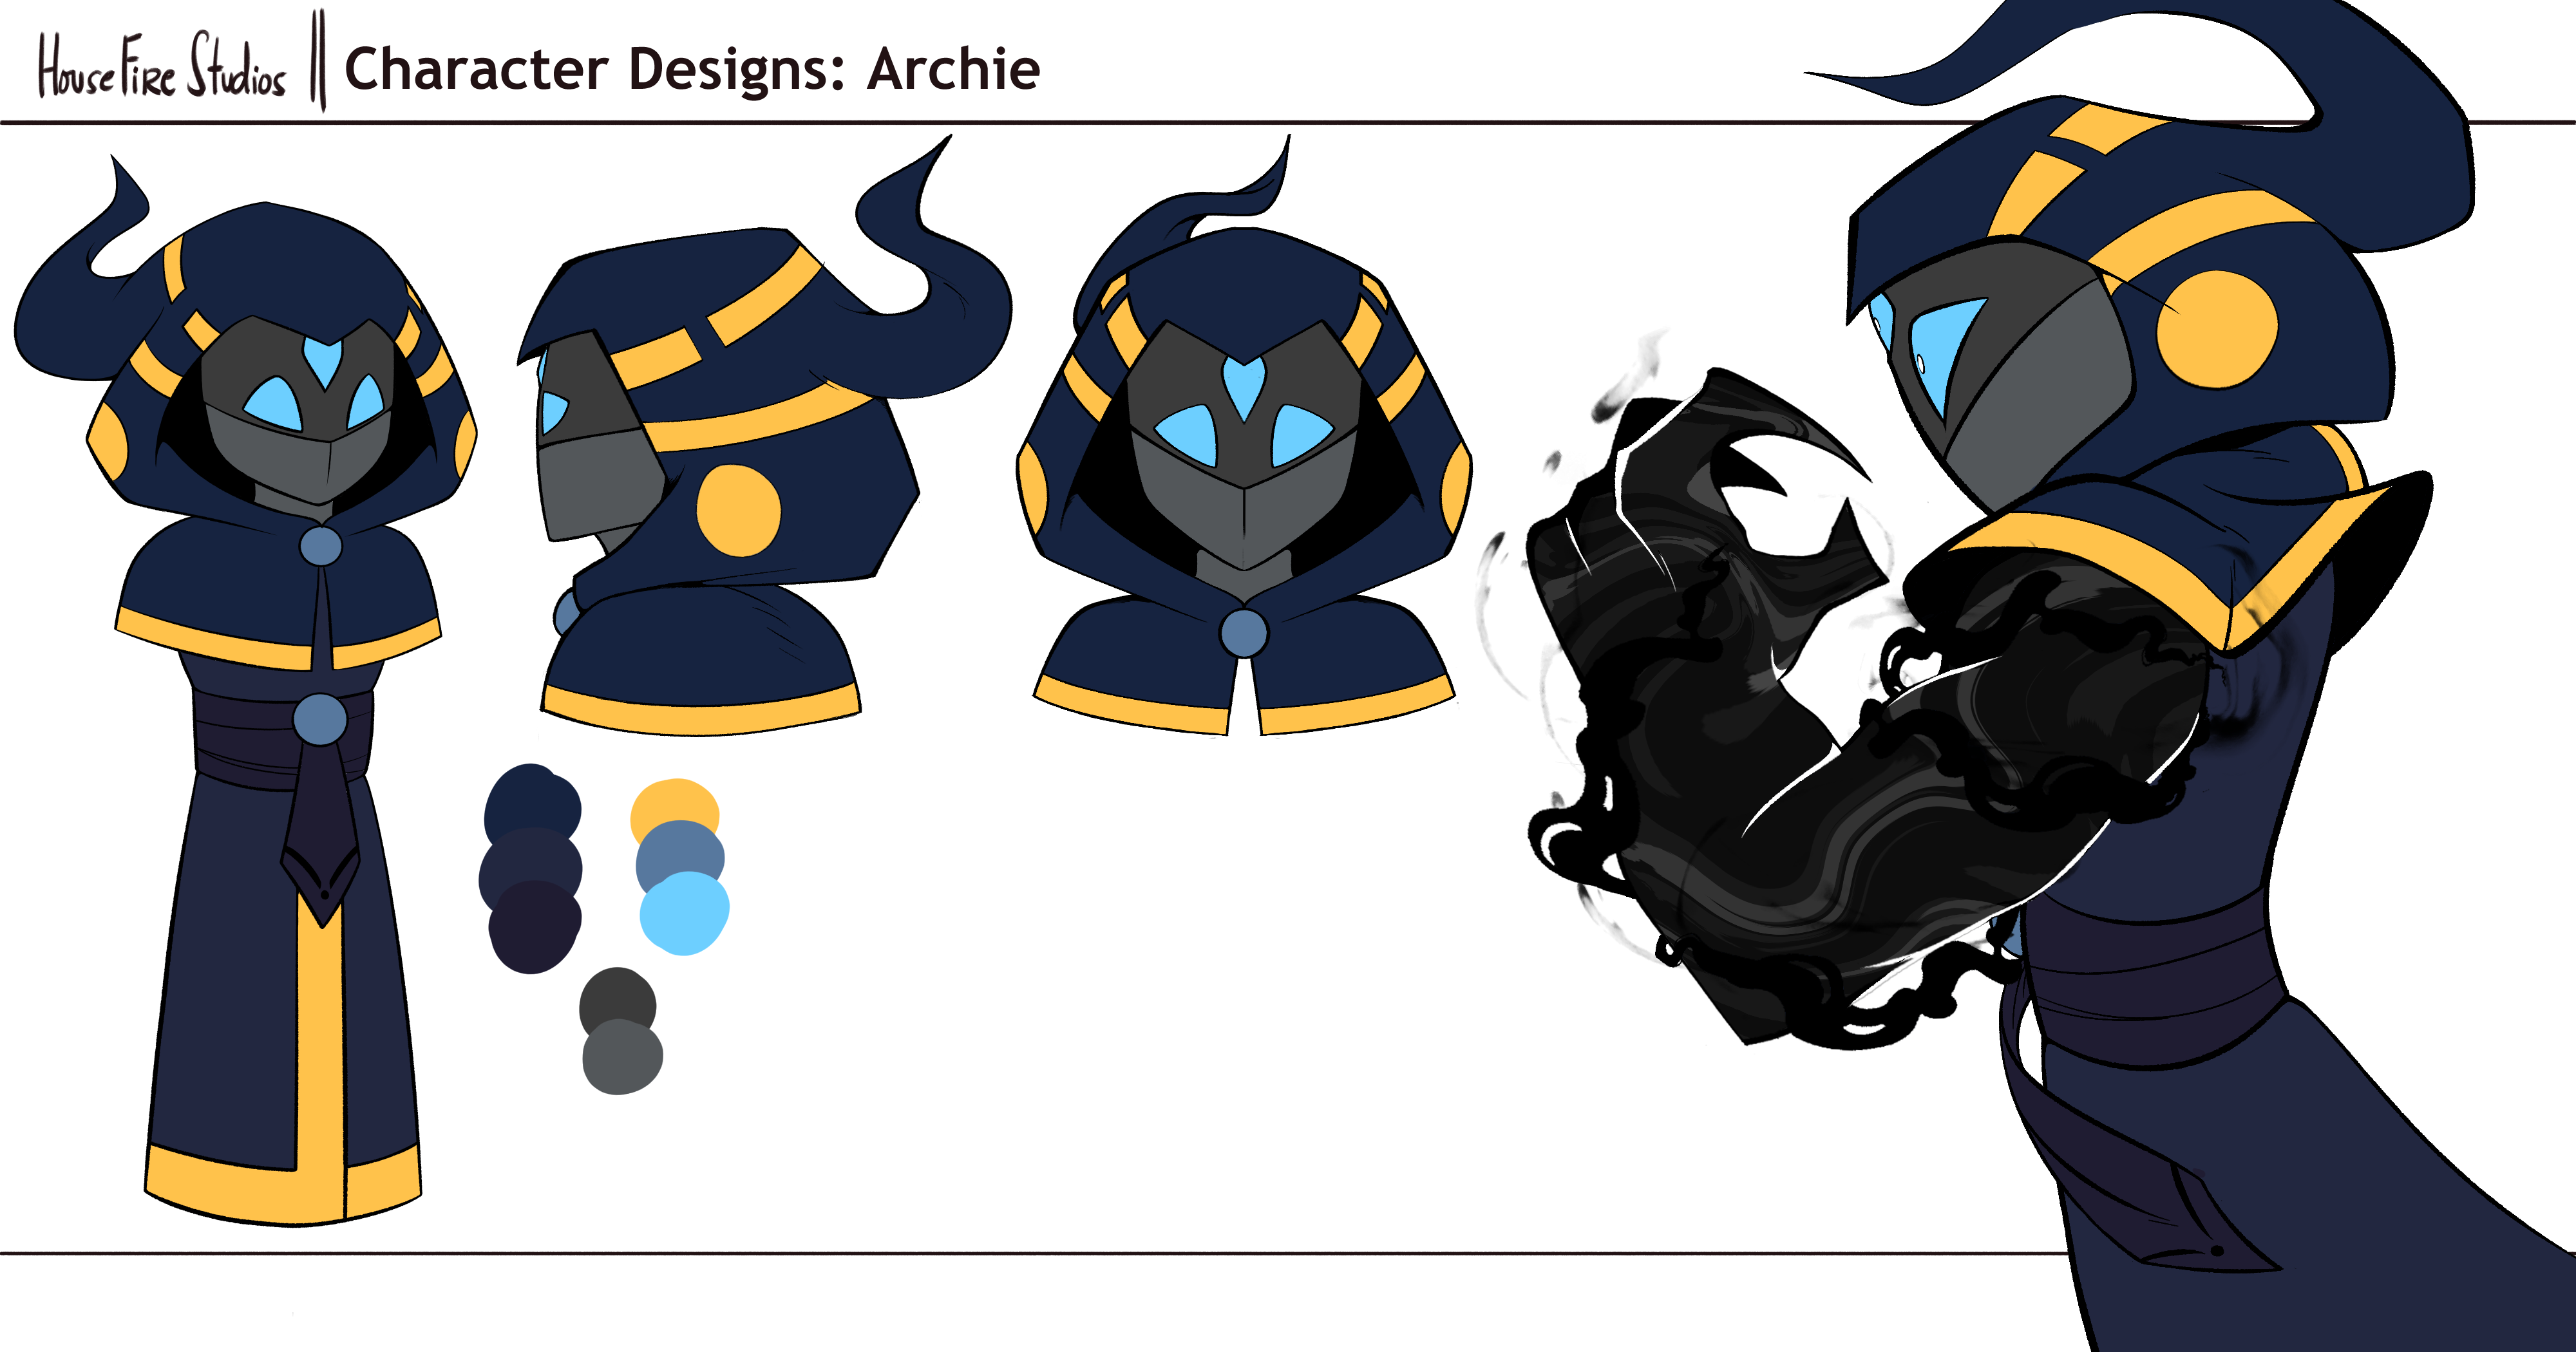 Archie Reference Sheet